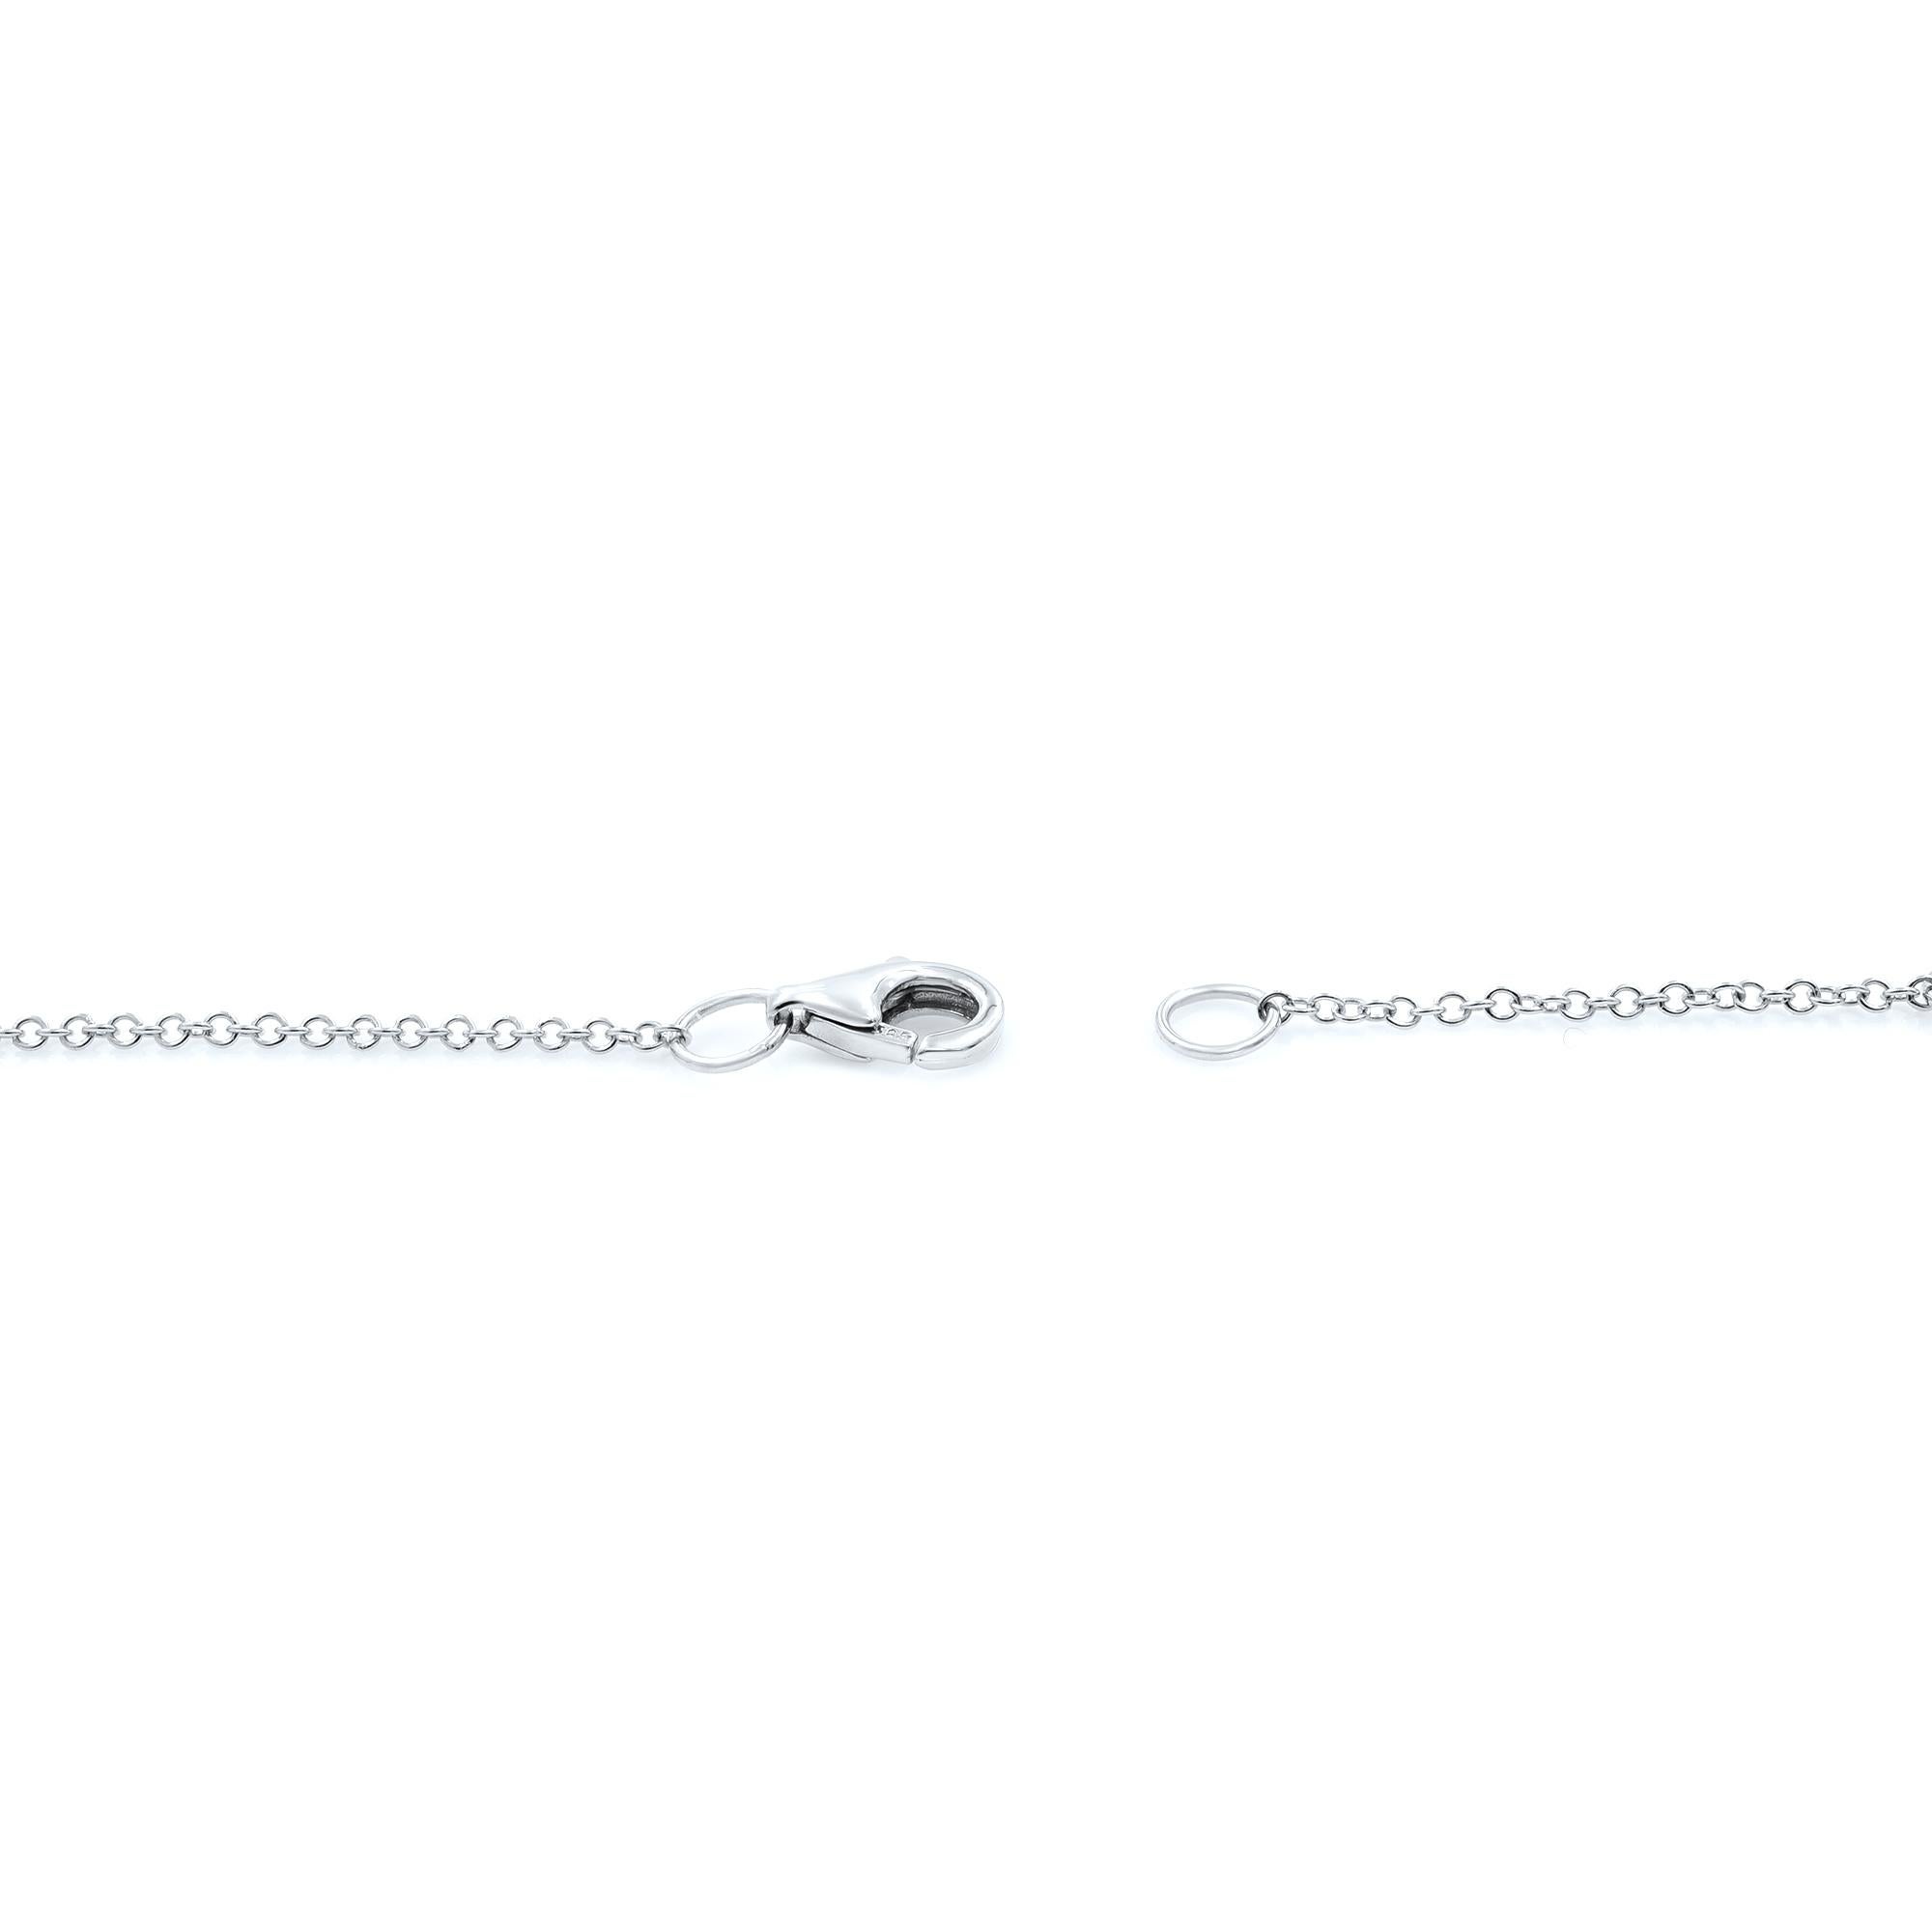 Rachel Koen Diamond Composite Lariat Necklace 14k White Gold 0.29cttw In New Condition For Sale In New York, NY